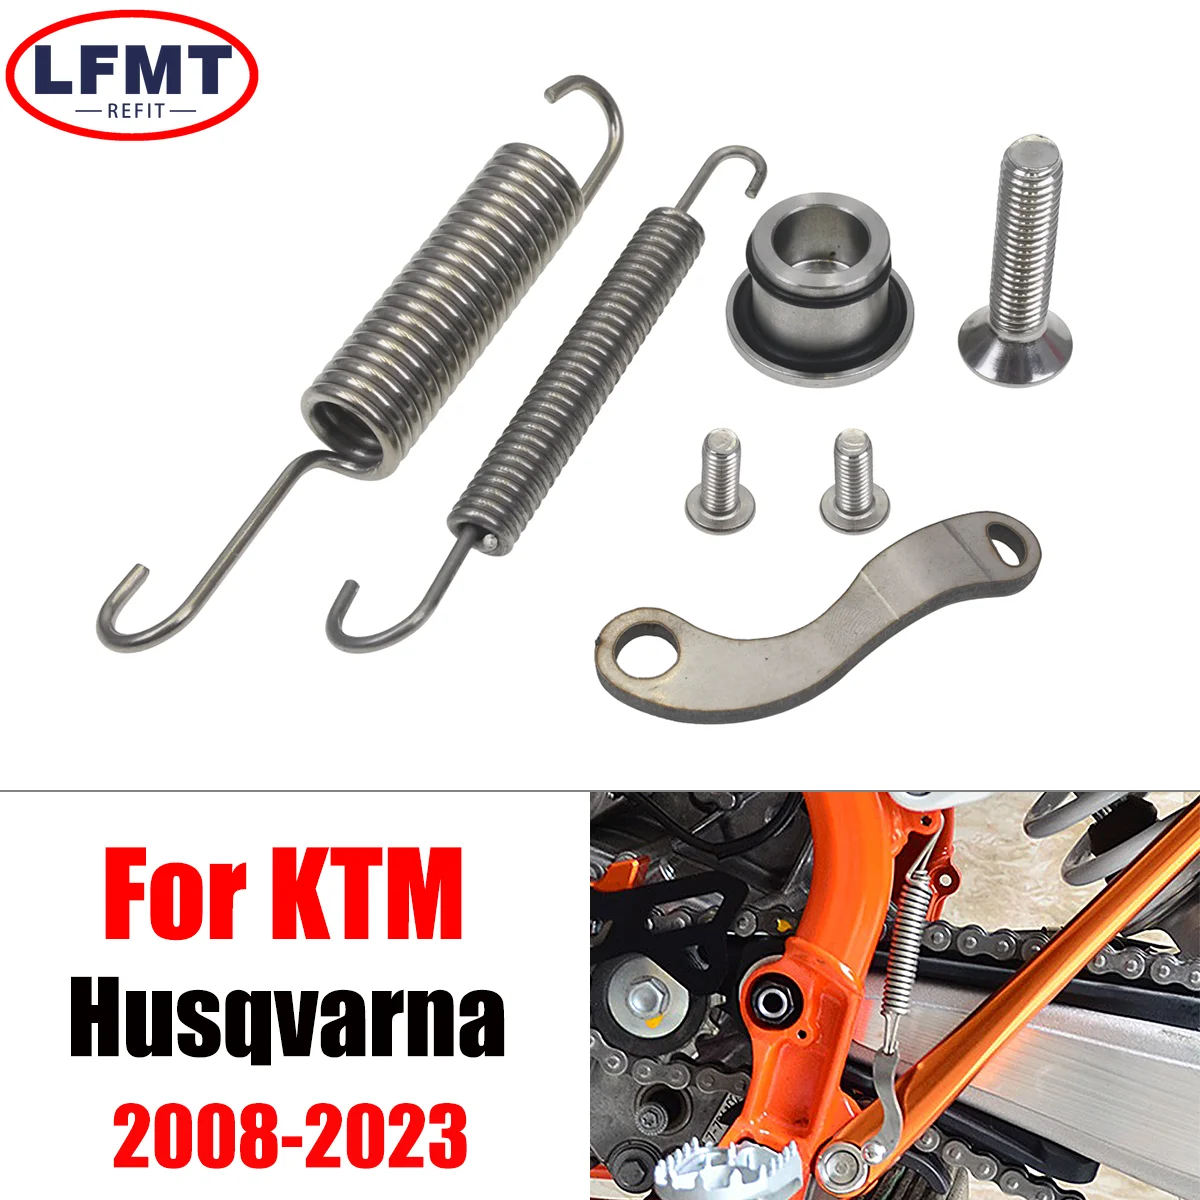 

For Husqvarna FE FX TE TX 300 350 For KTM EXC EXCF XC XCW XCF XCF-W Six Days 125-500 2008-2023 Kickstand Side Stand Springs Kit